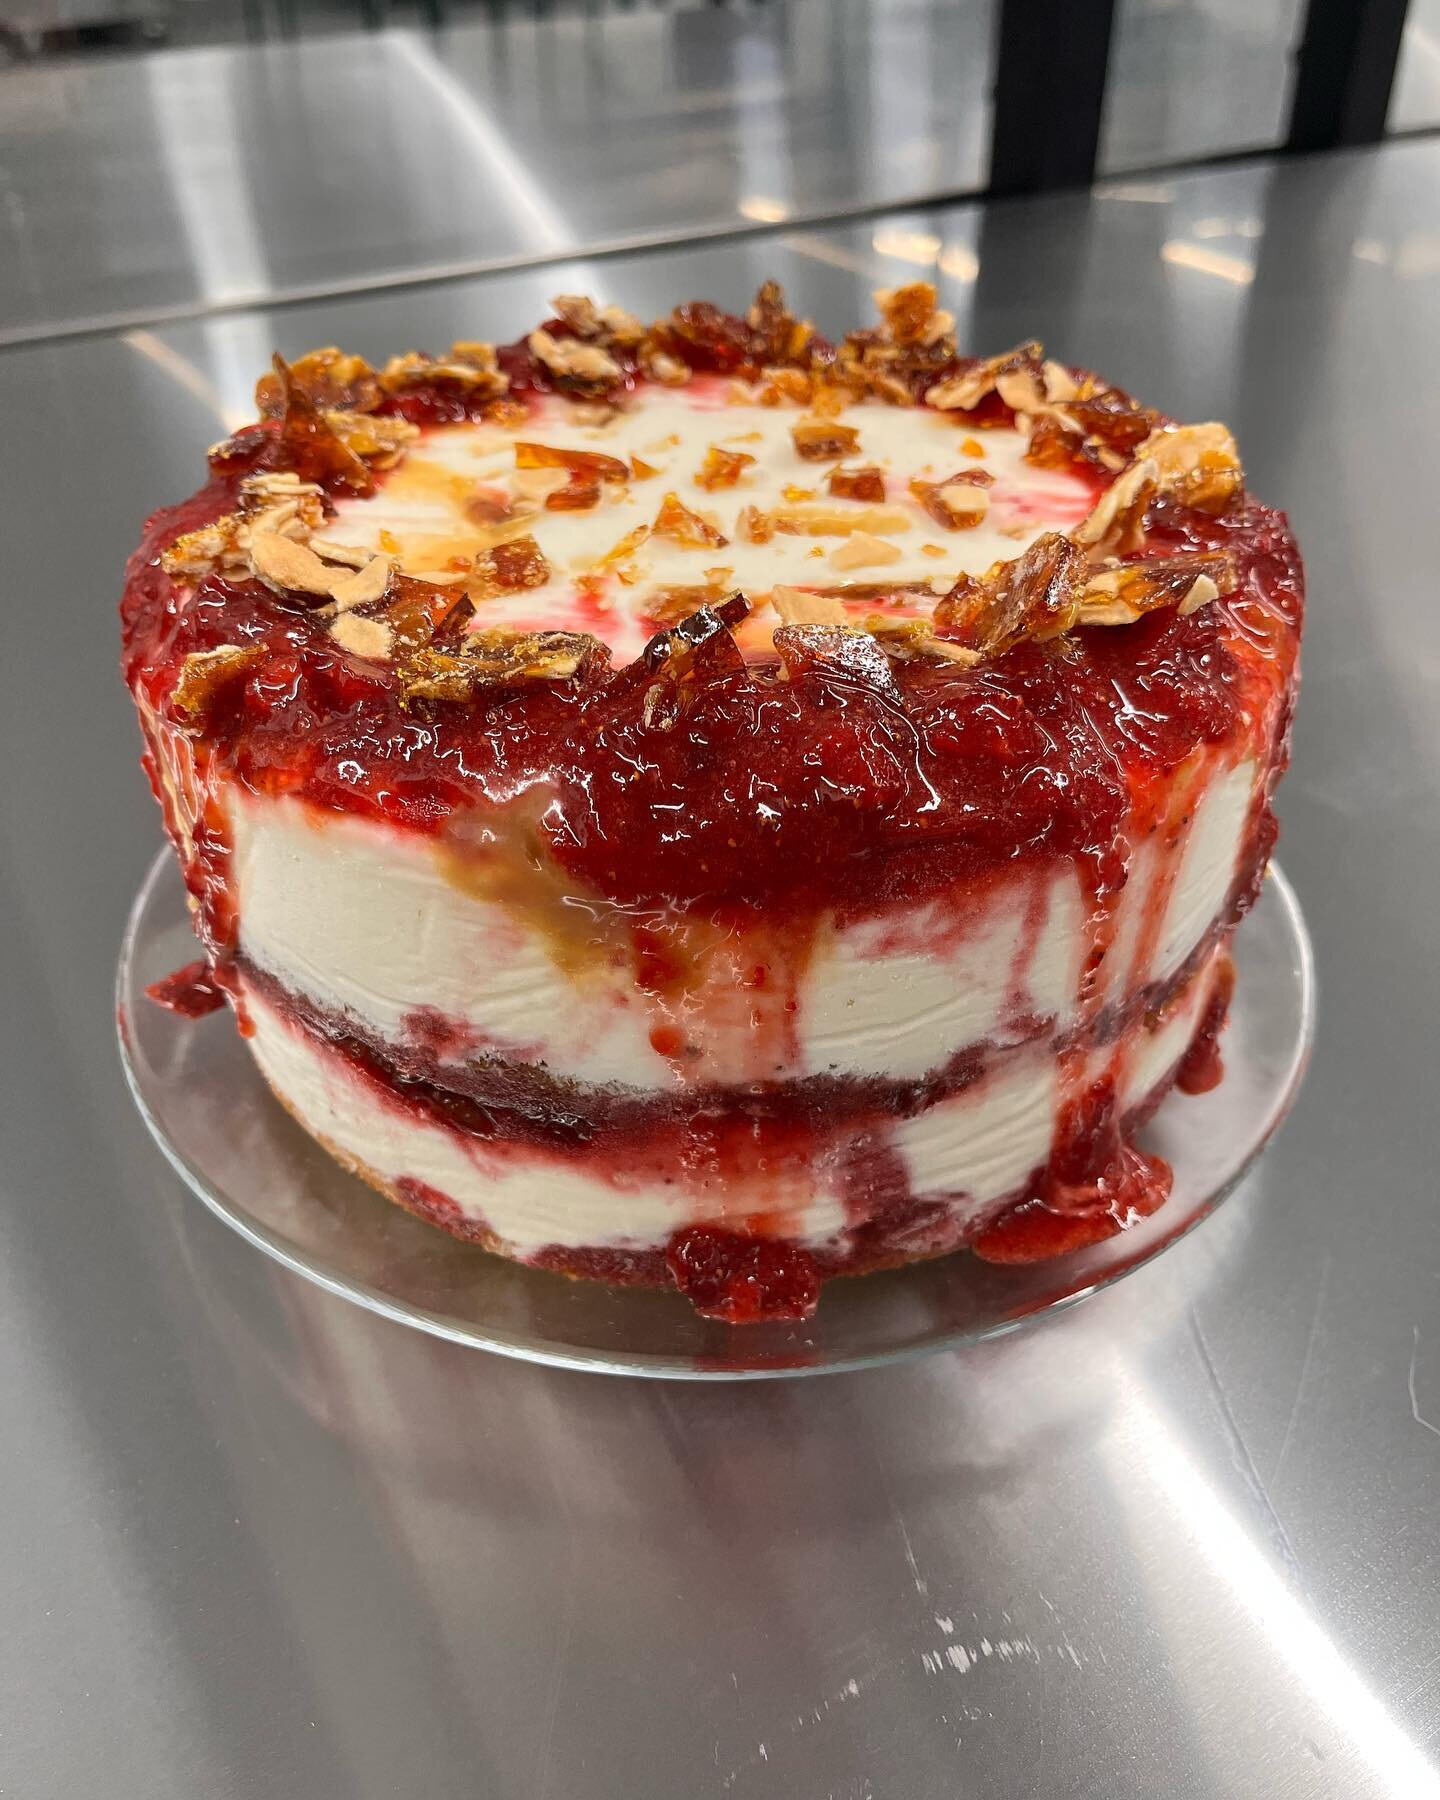 We have two of these beauties available. They are our 8 inch jam cake. Good for 8-12 people. These ones are with a house made local strawberry jam, caramel, waffle cone brittle, vanilla cake and vanilla ice cream. Send us a pm to get em&rsquo;.